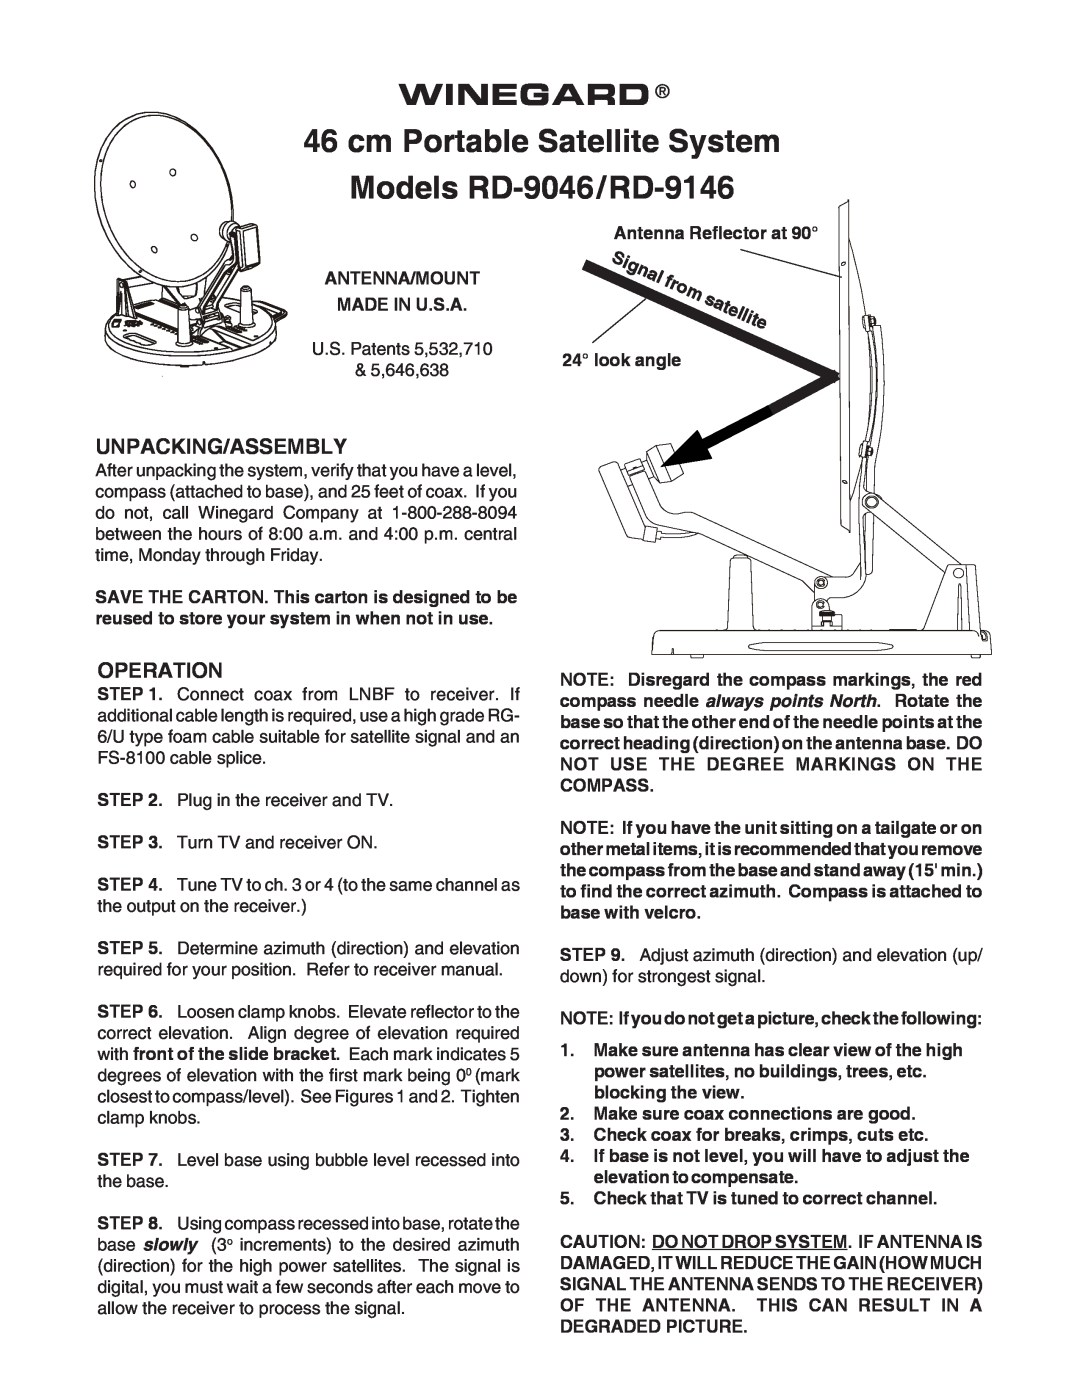 Winegard manual Unpacking/Assembly, Operation, Winegard, cm Portable Satellite System Models RD-9046/RD-9146 